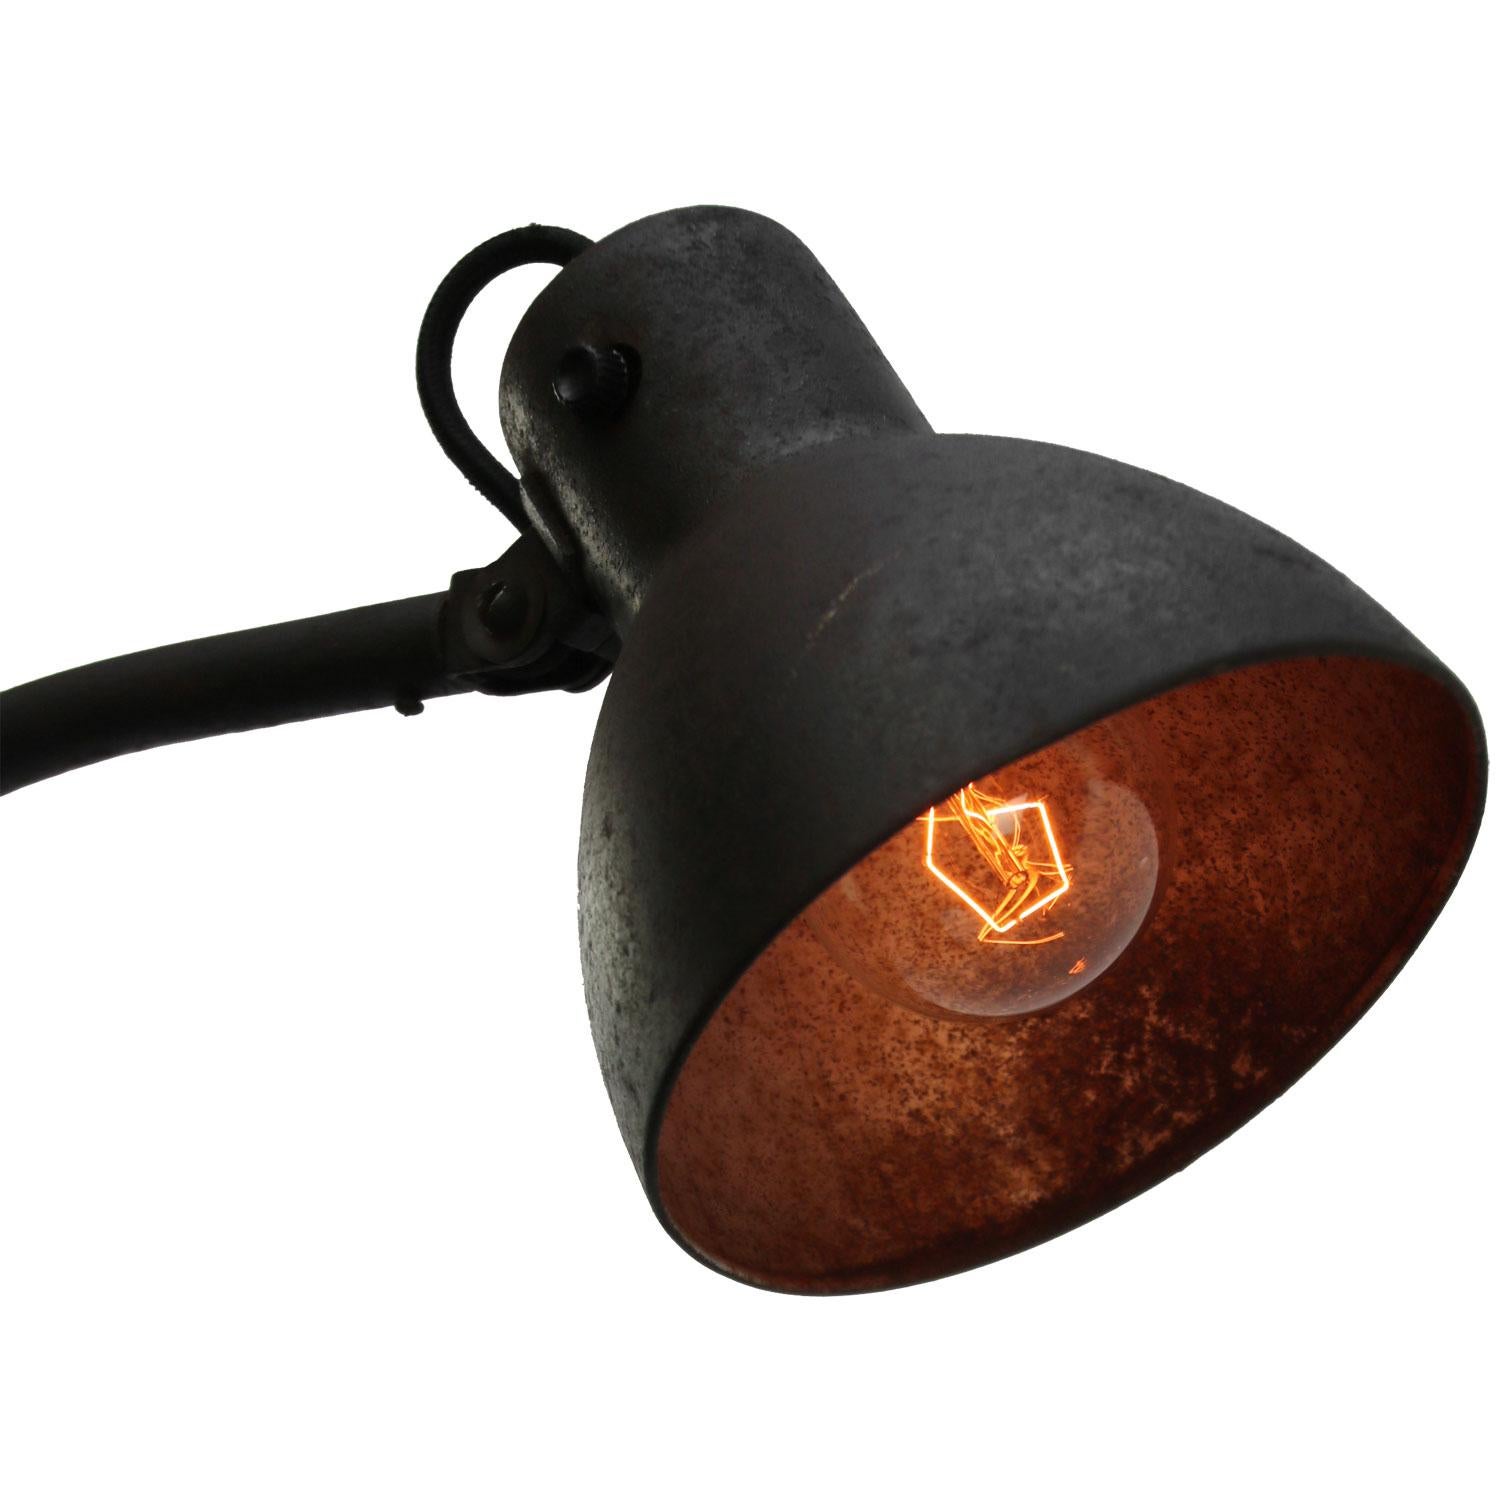 Dark brown black Industrial work / desk light with metal shade
Black cotton wire, plug and switch in shade

Weight: 1.80 kg / 4 lb

Priced per individual item. All lamps have been made suitable by international standards for incandescent light